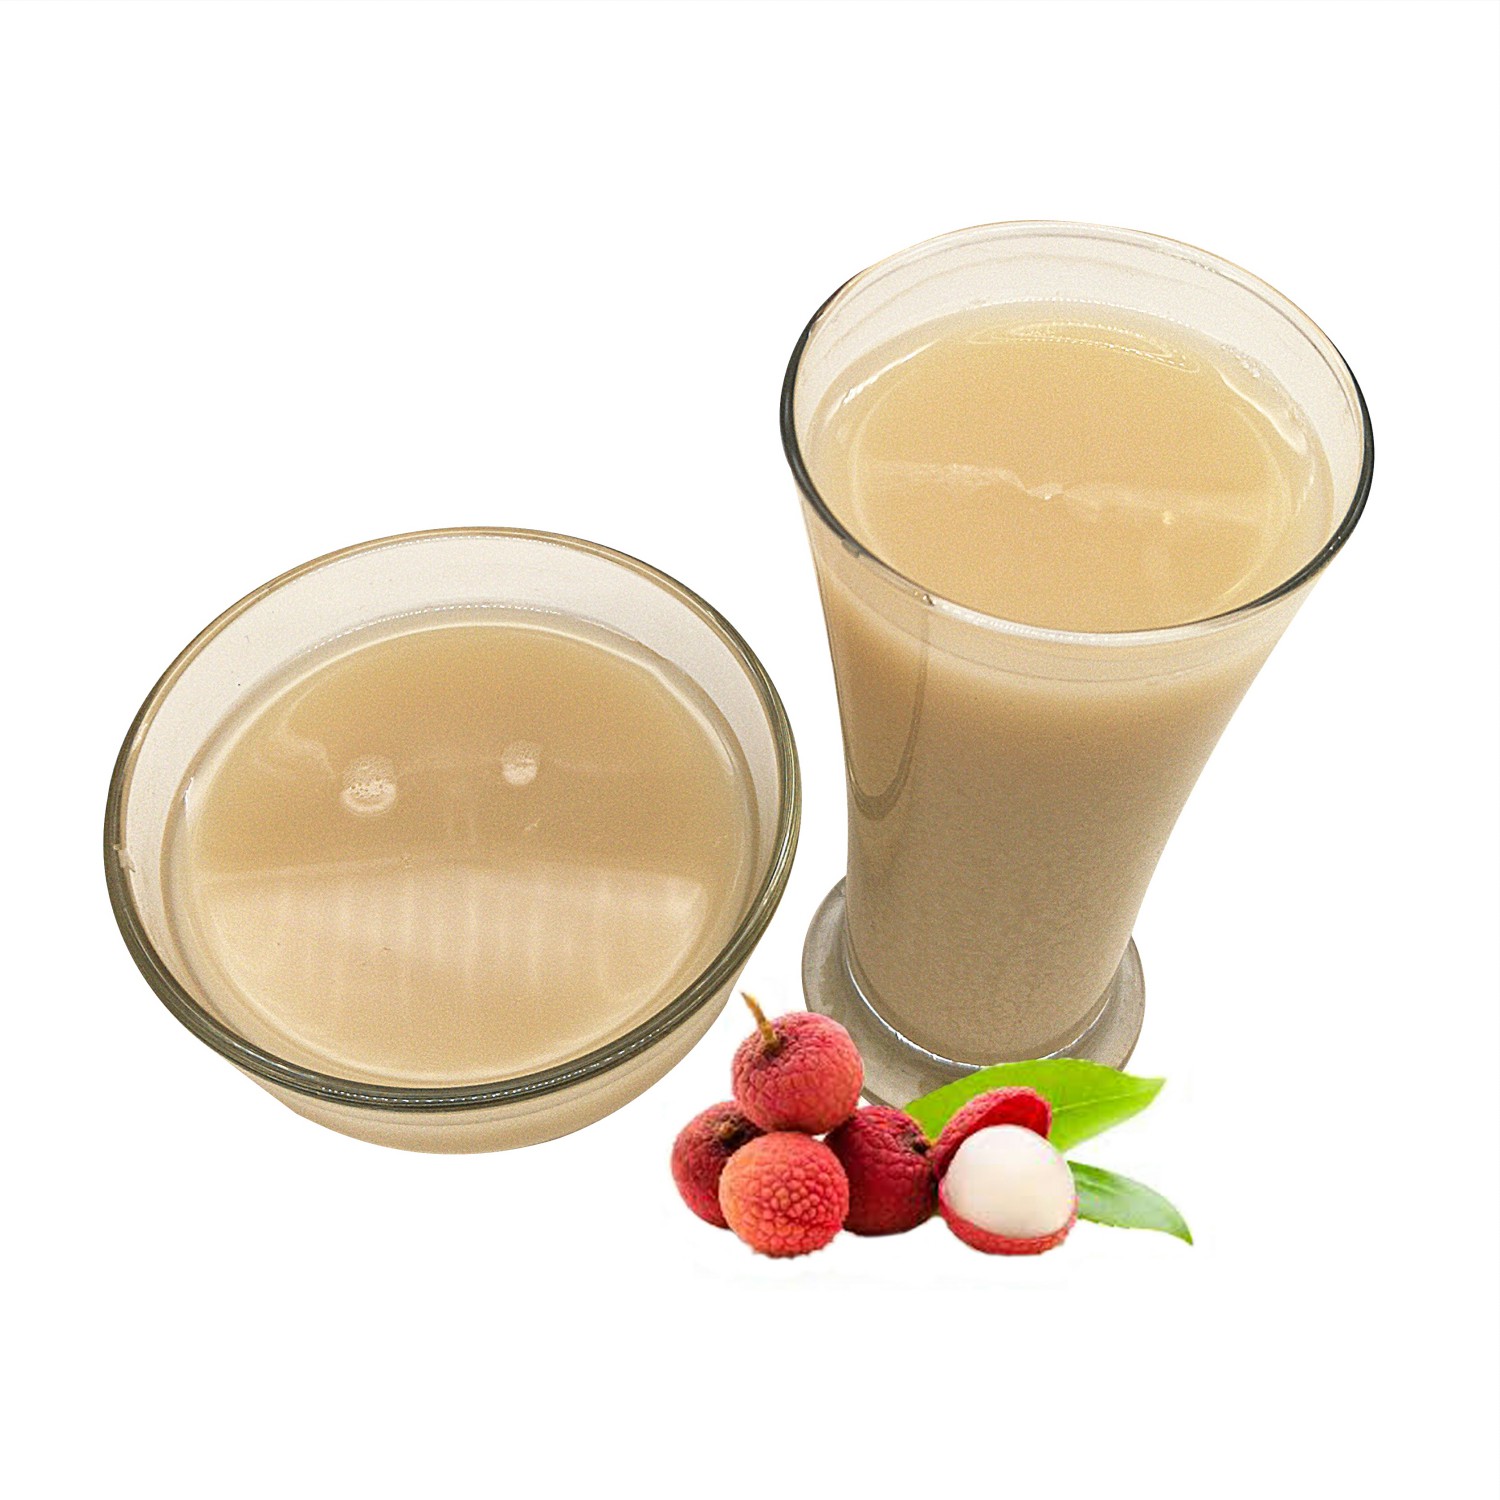 Lychee juice concentrate